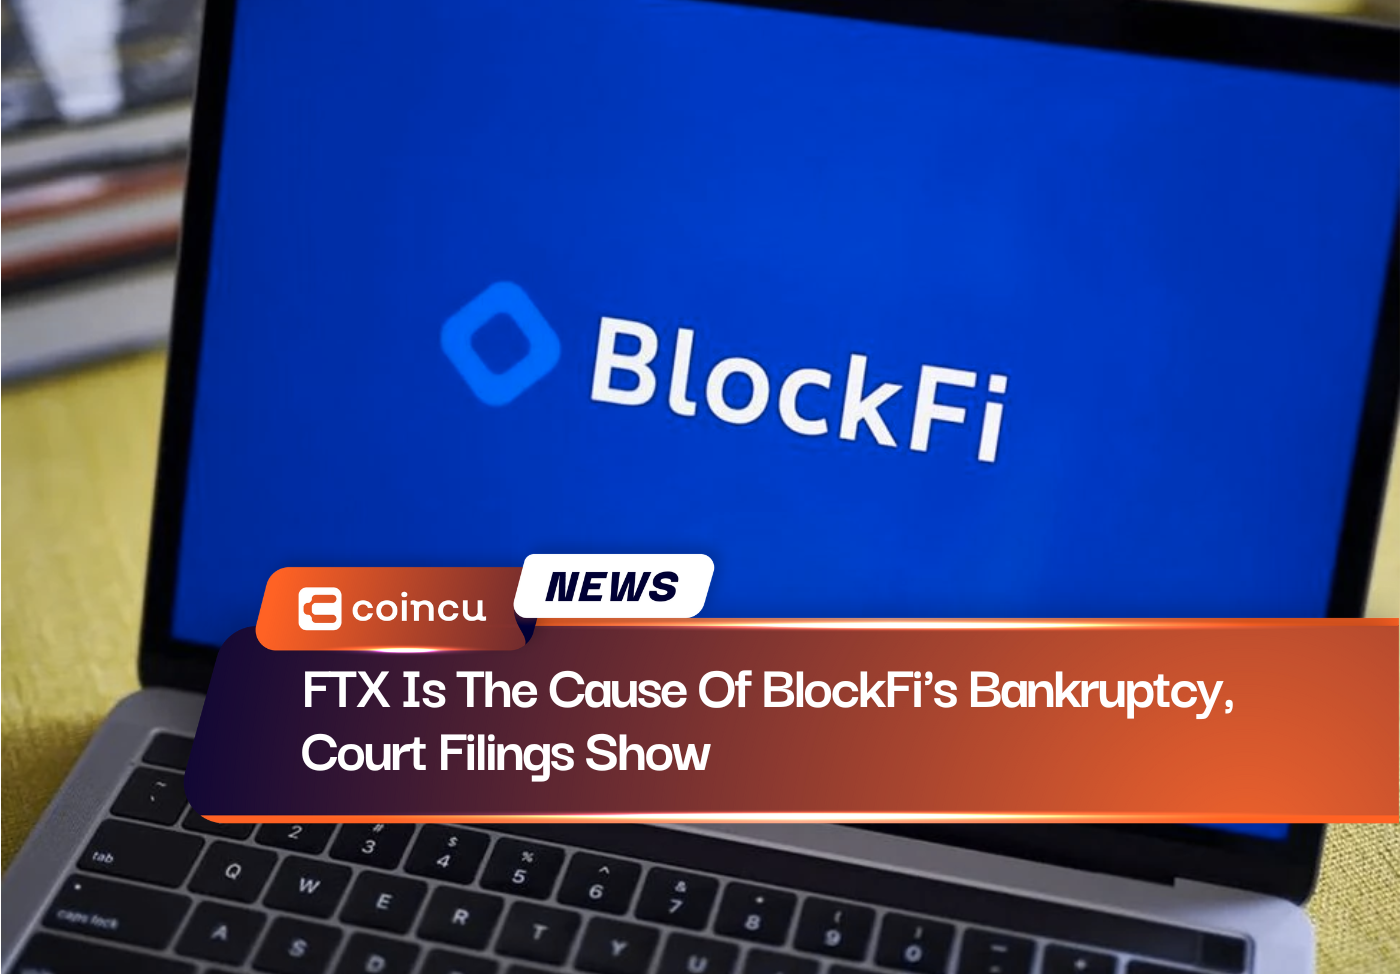 FTX Is The Cause Of BlockFi's Bankruptcy, Court Filings Show